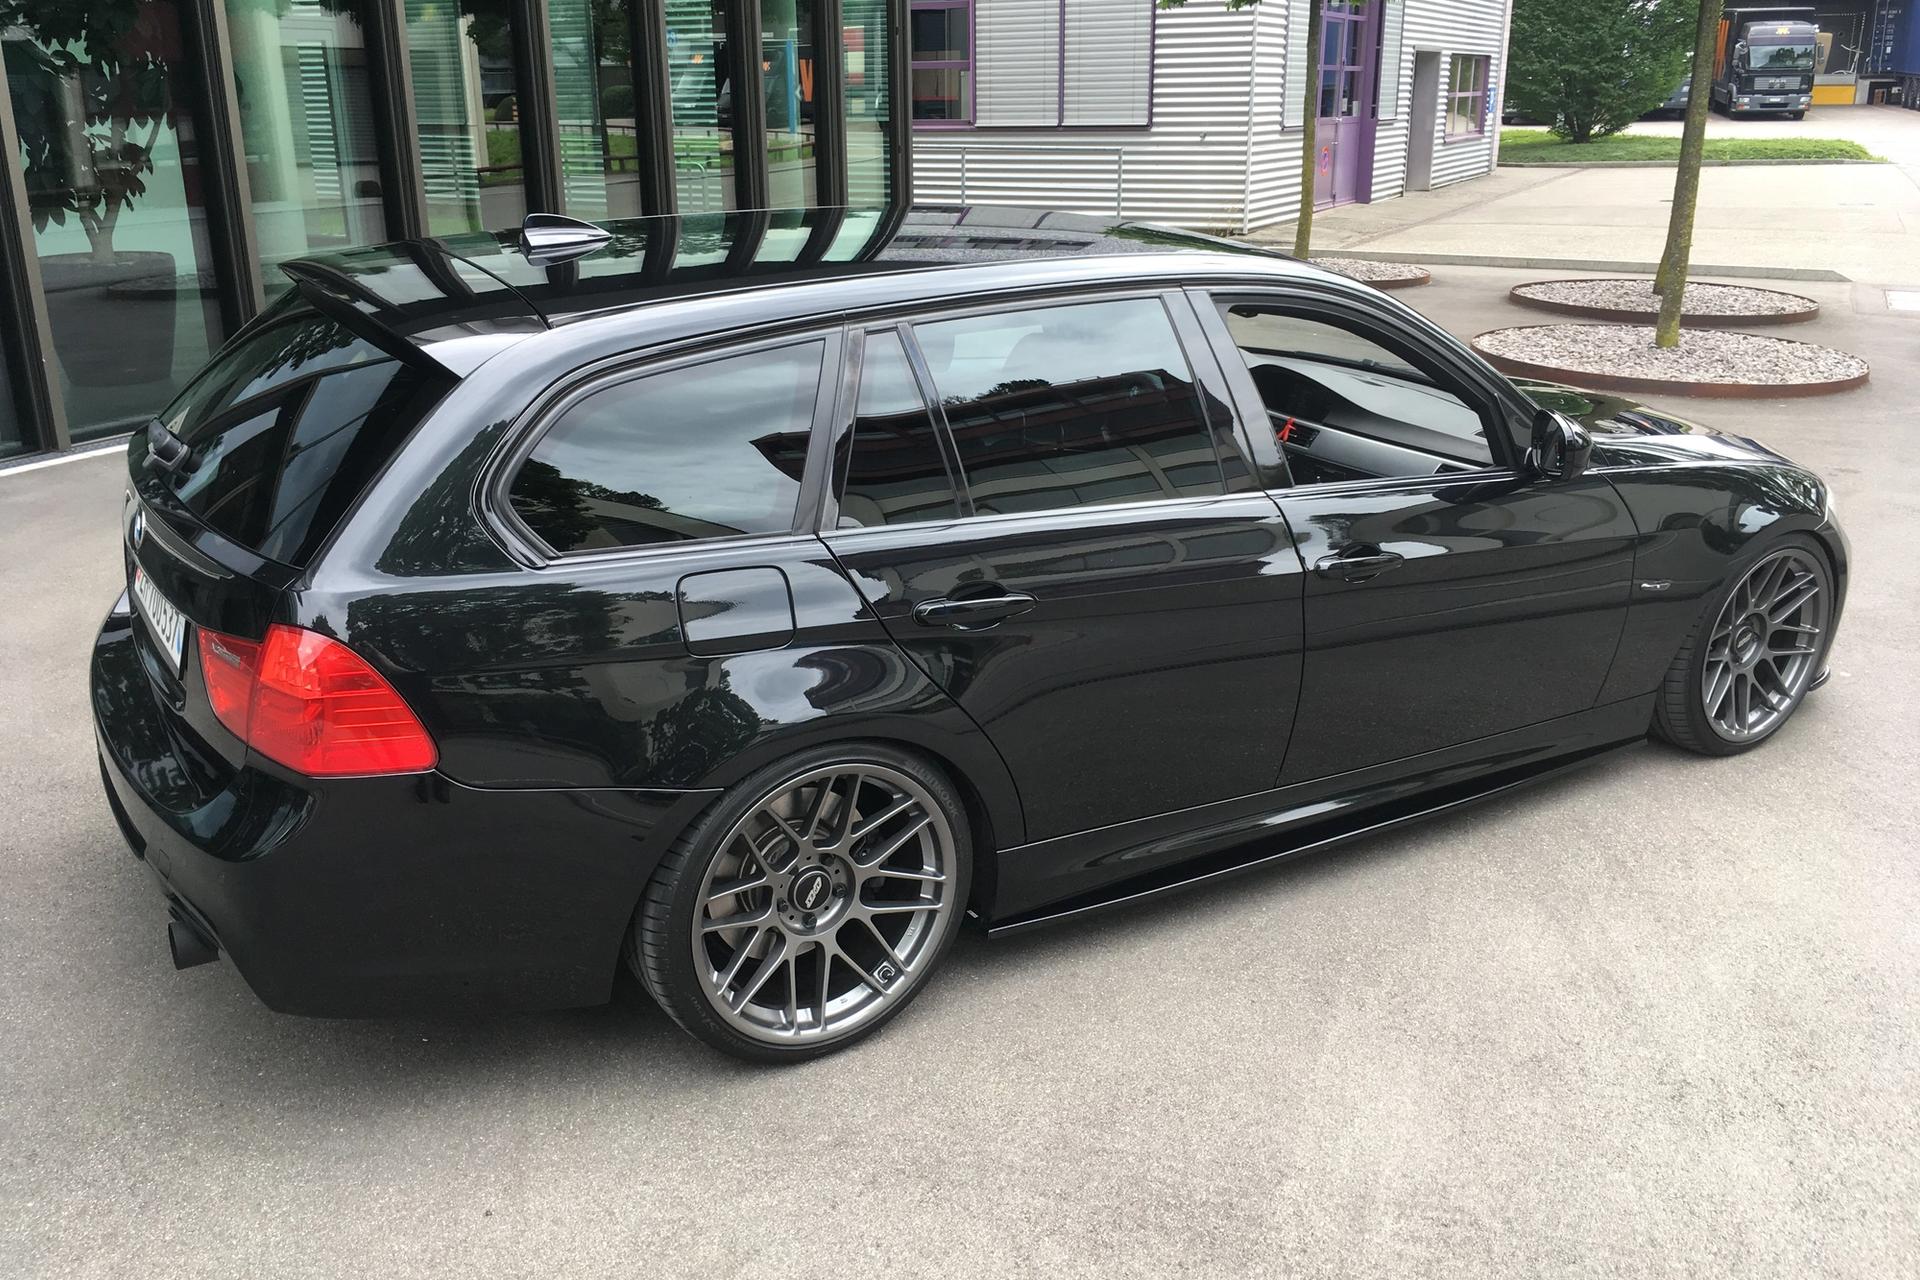 BMW E91 LCI Wagon 3 Series with 19 ARC-8 in Anthracite on BMW E90